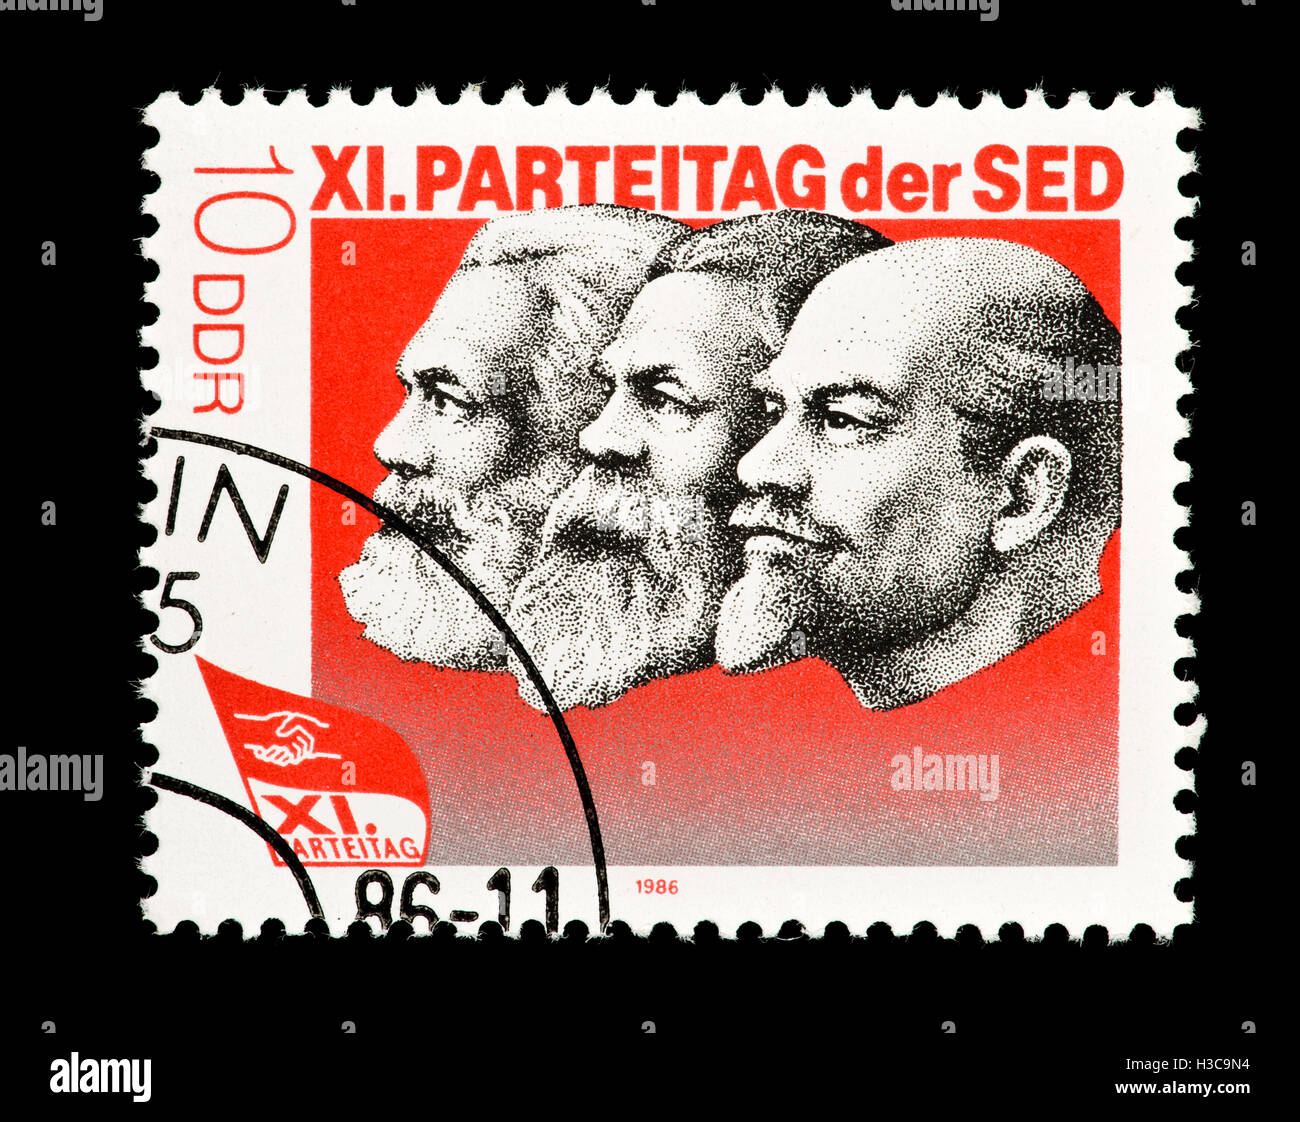 Postage stamp from East Germany depicting Karl Marx, Engels and Lenin, Socialist Unity 11th Party Day. Stock Photo